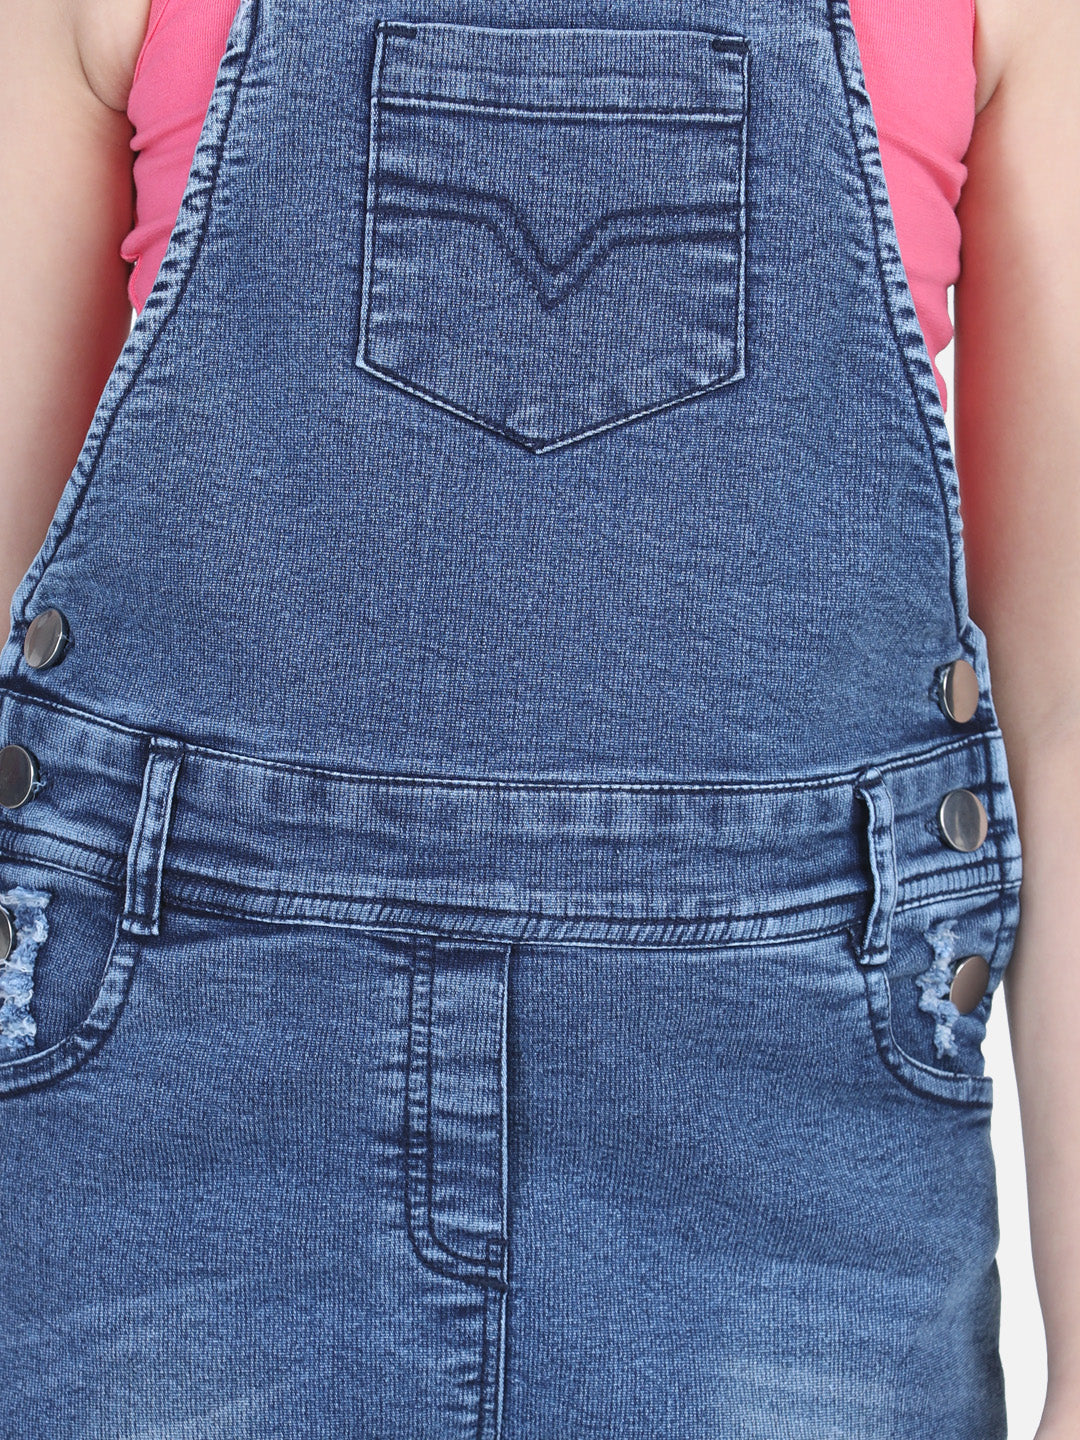 Girls Distressed Denim Dungaree (T-shirt not included)